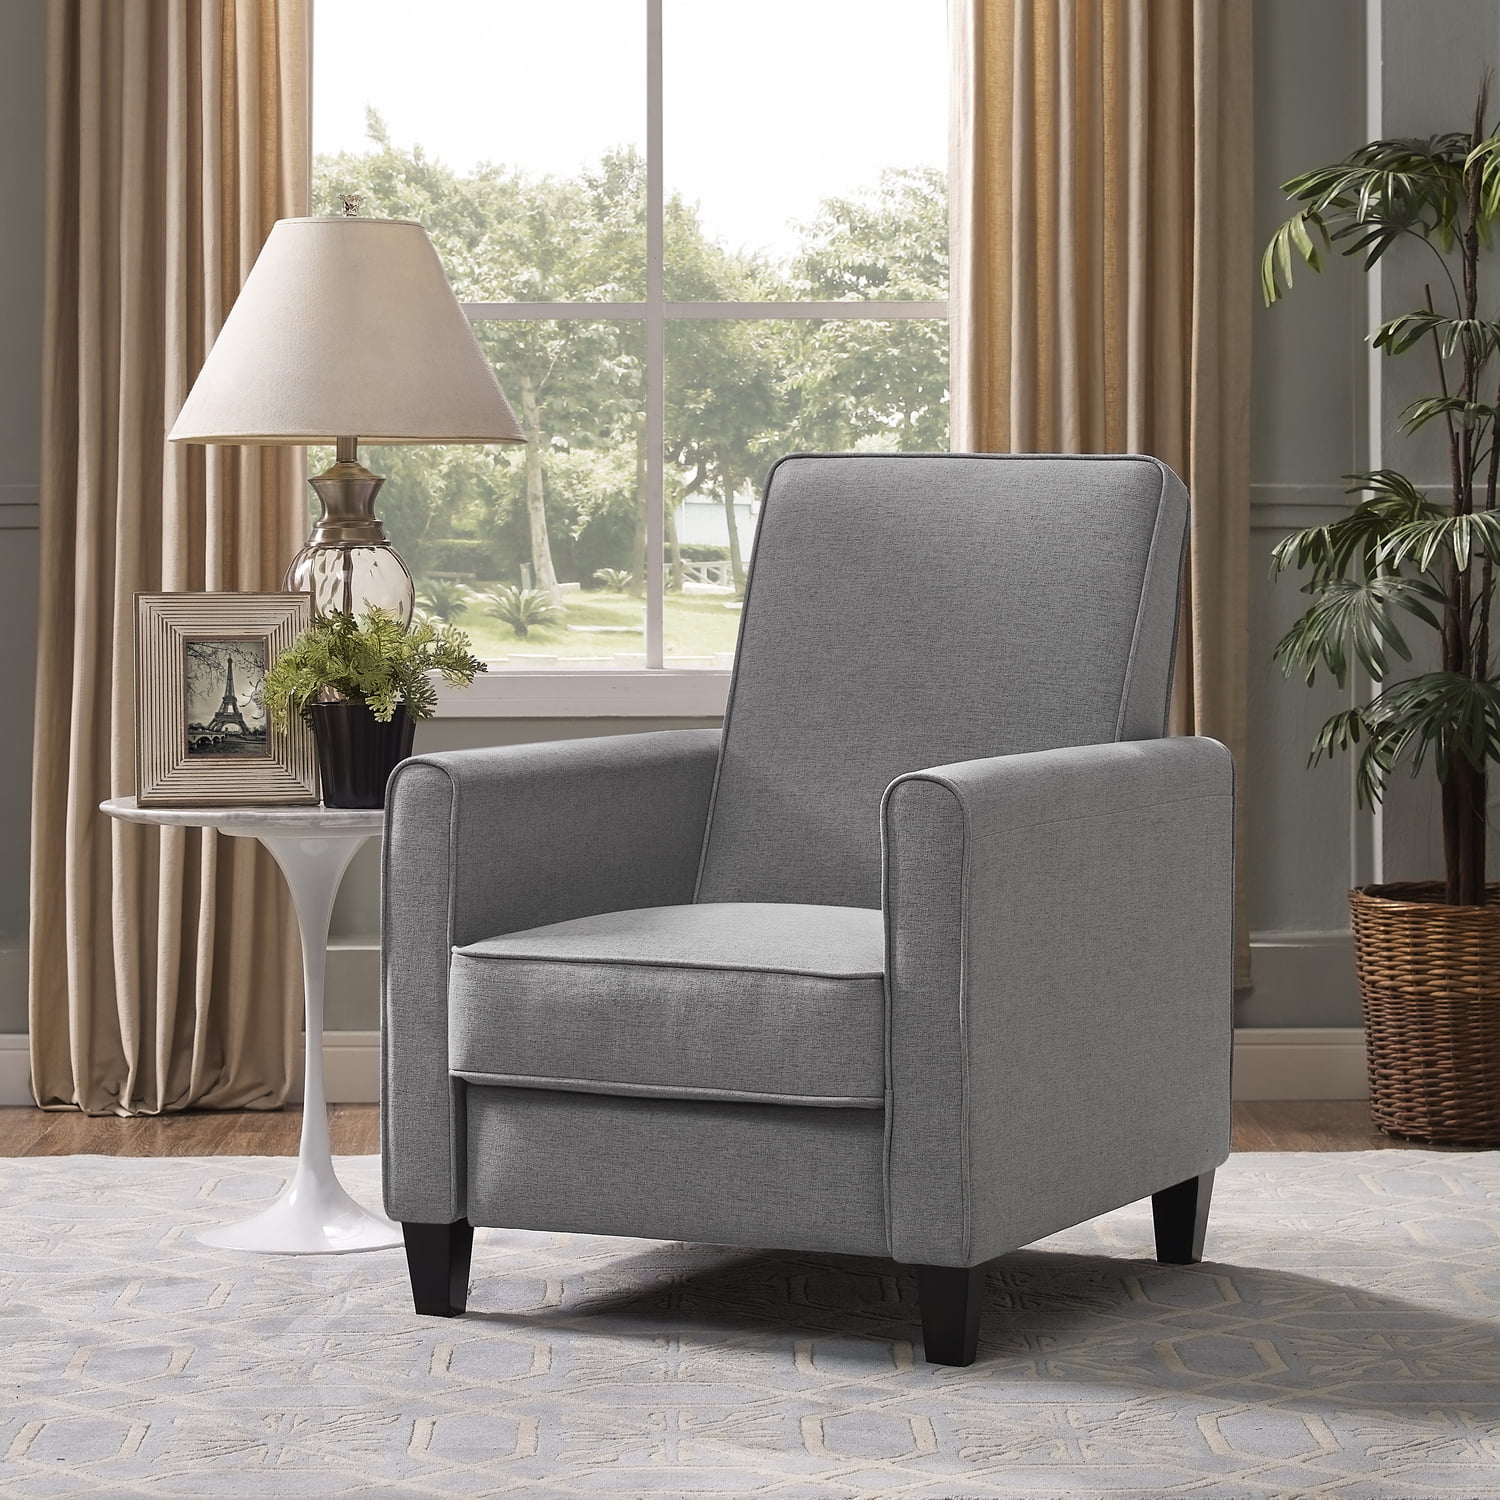 Buy Classic Recliner Cushion Grey from Alfresia